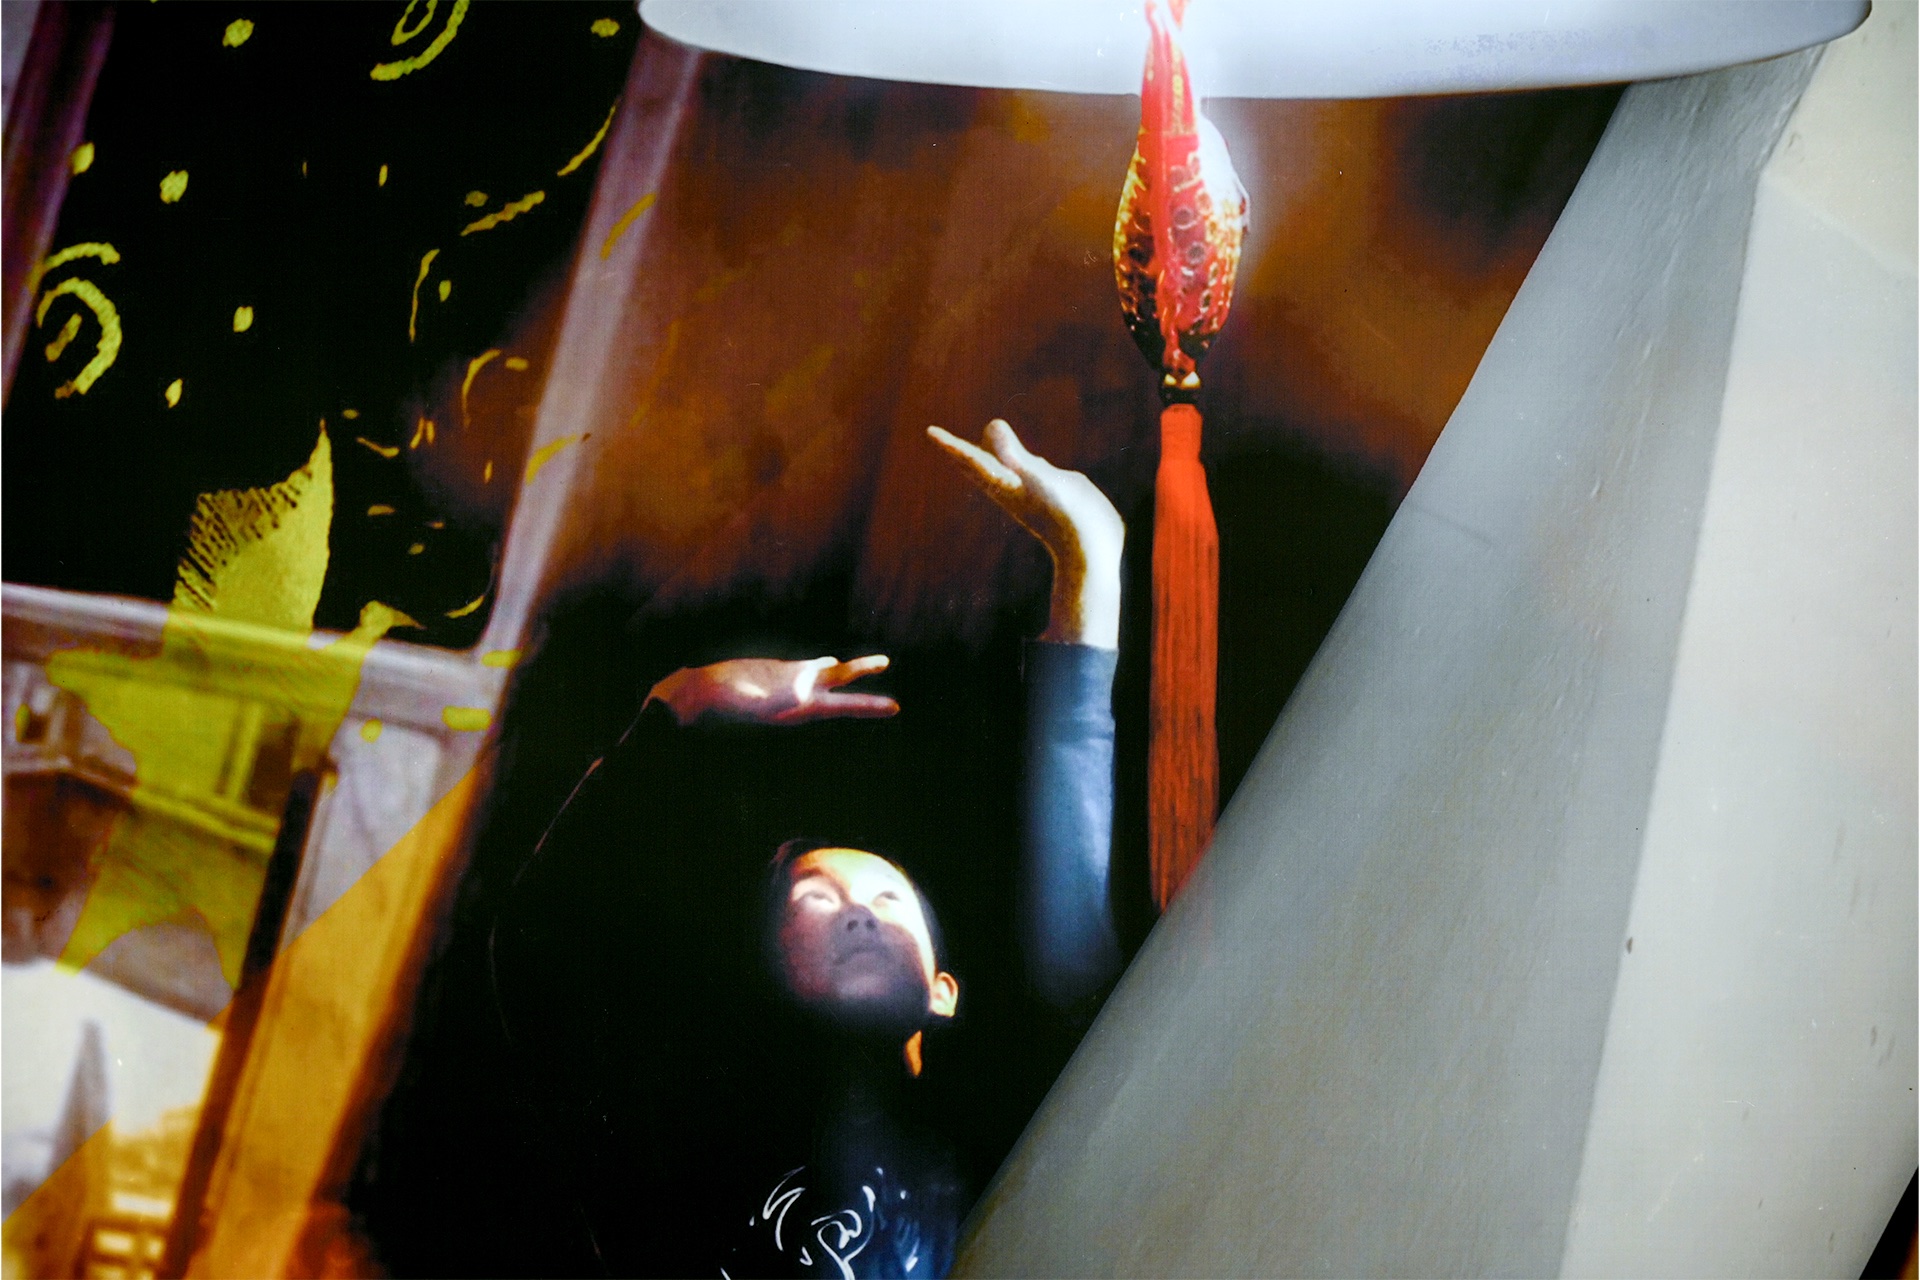 A person reaching towards a red ornament hung from a ceiling lamp.